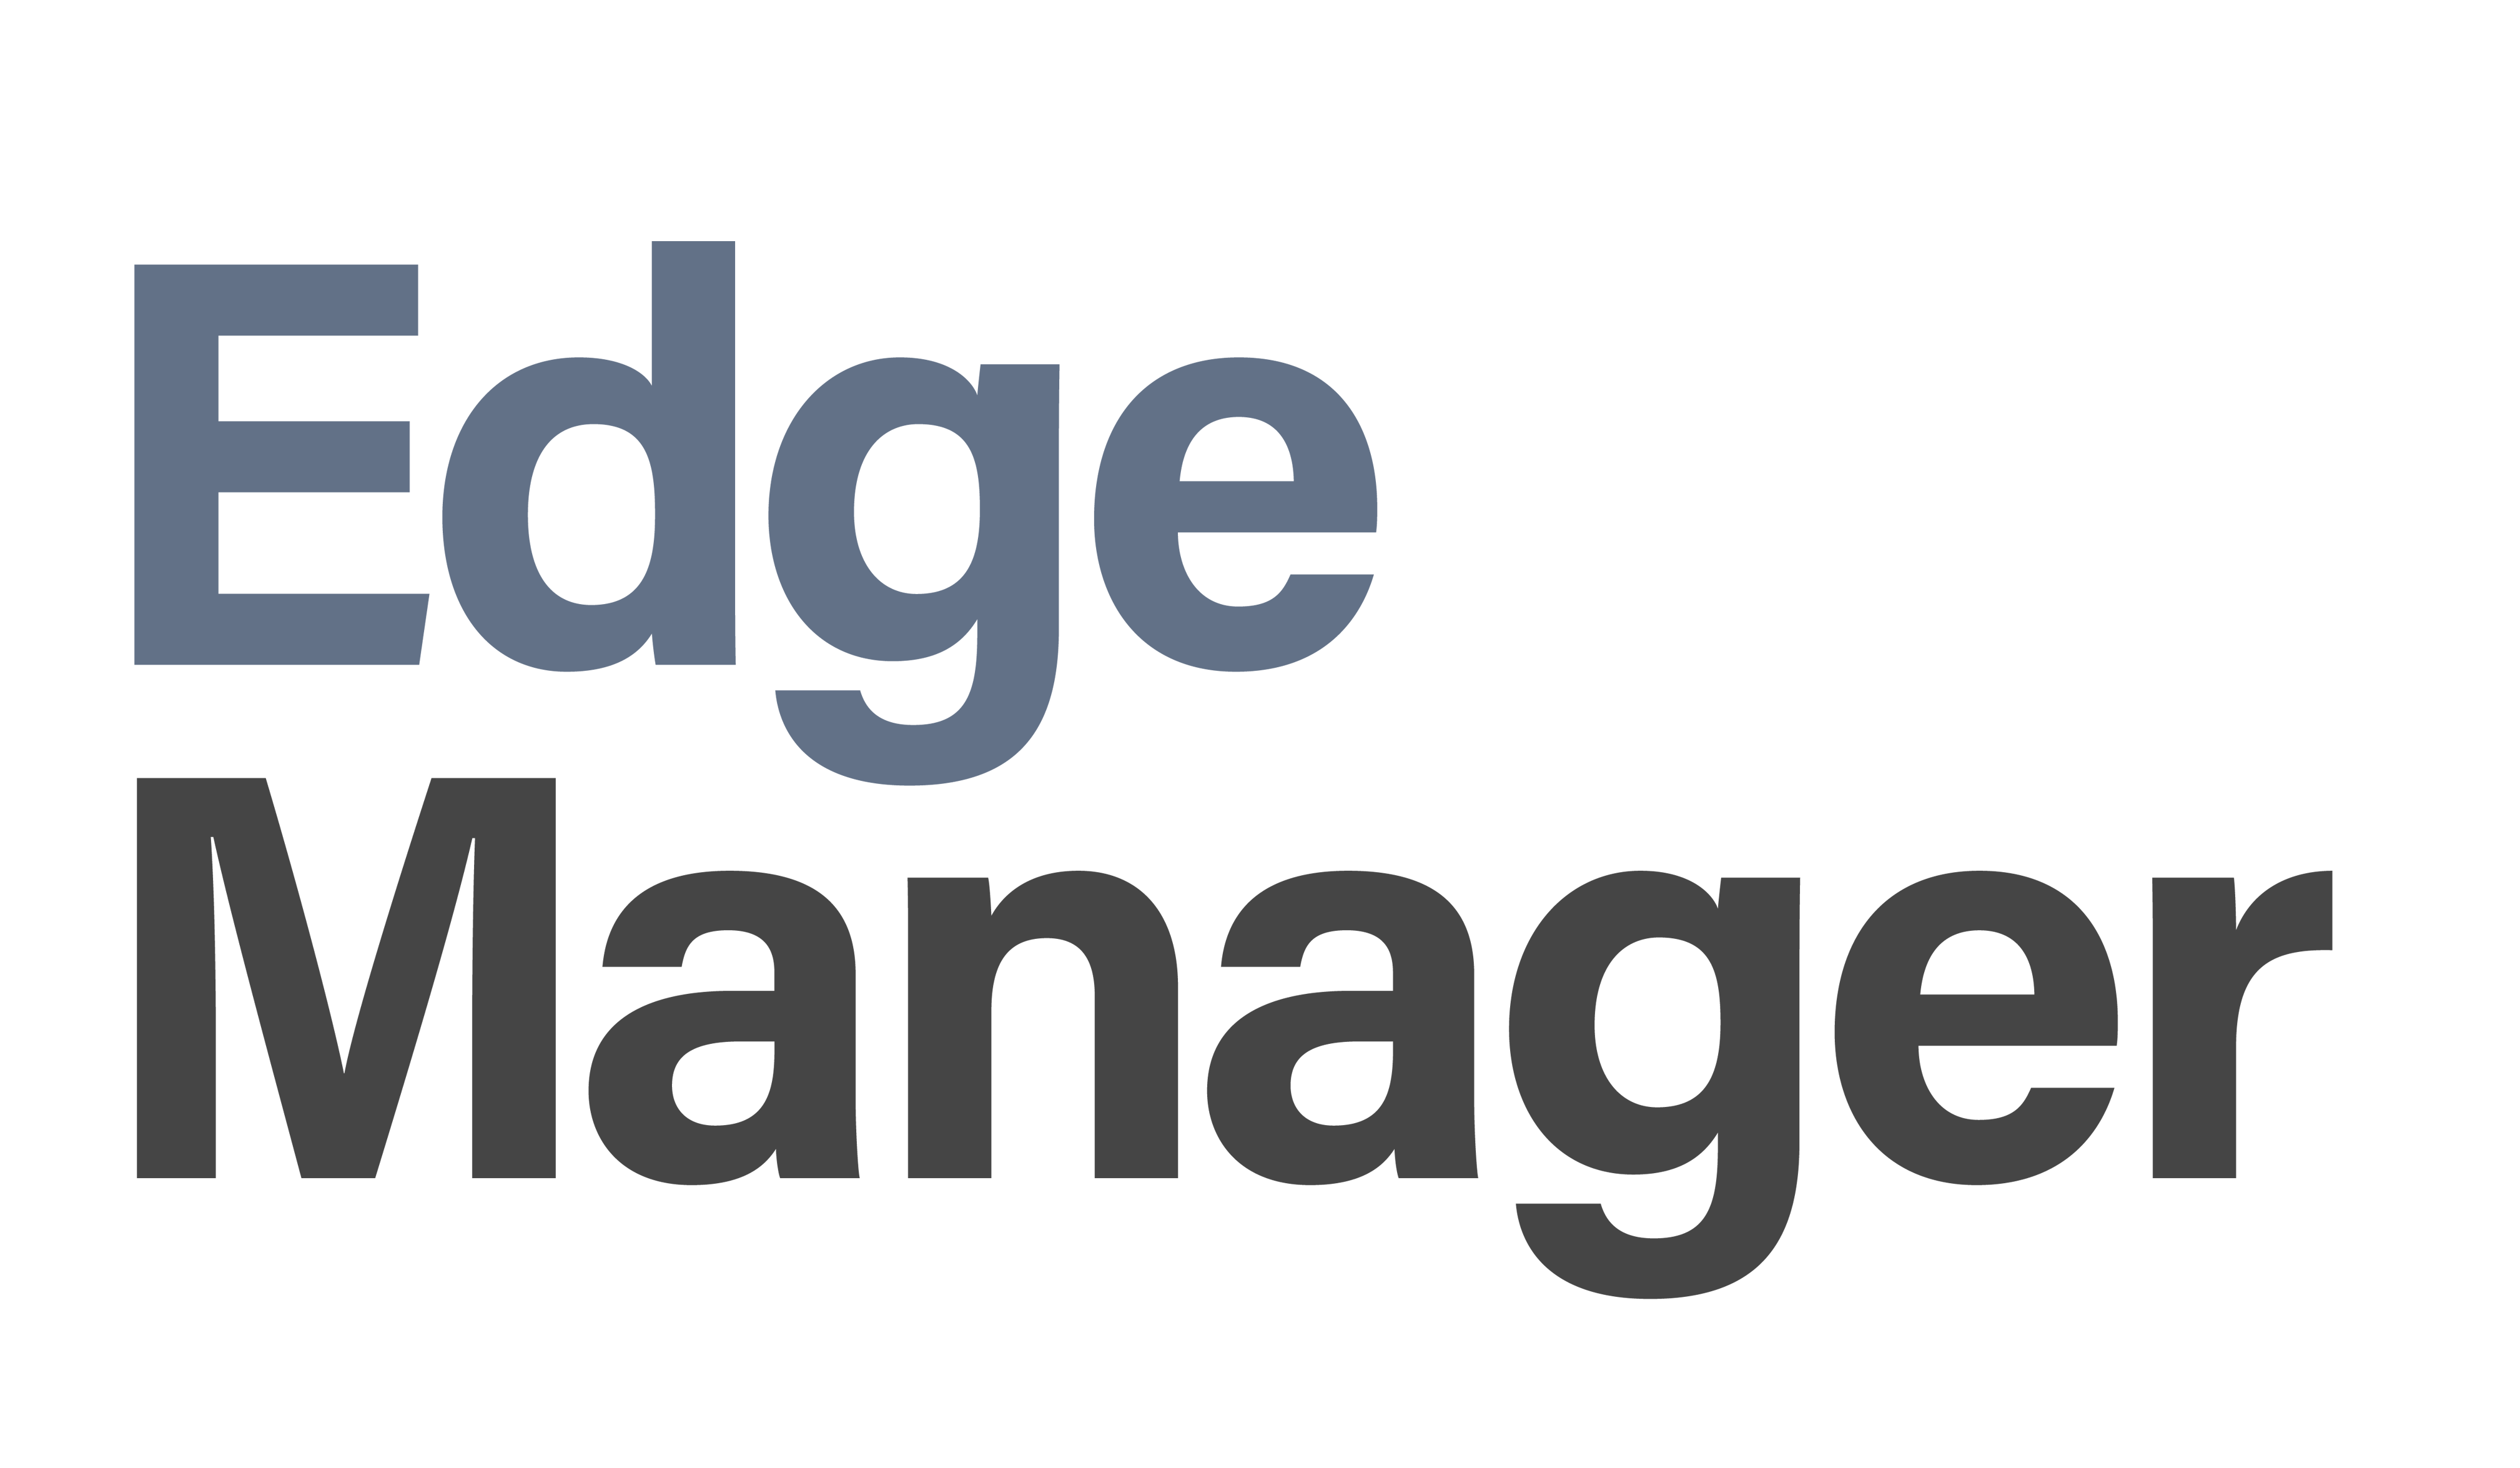 Edge Manager logo | IOTech Systems